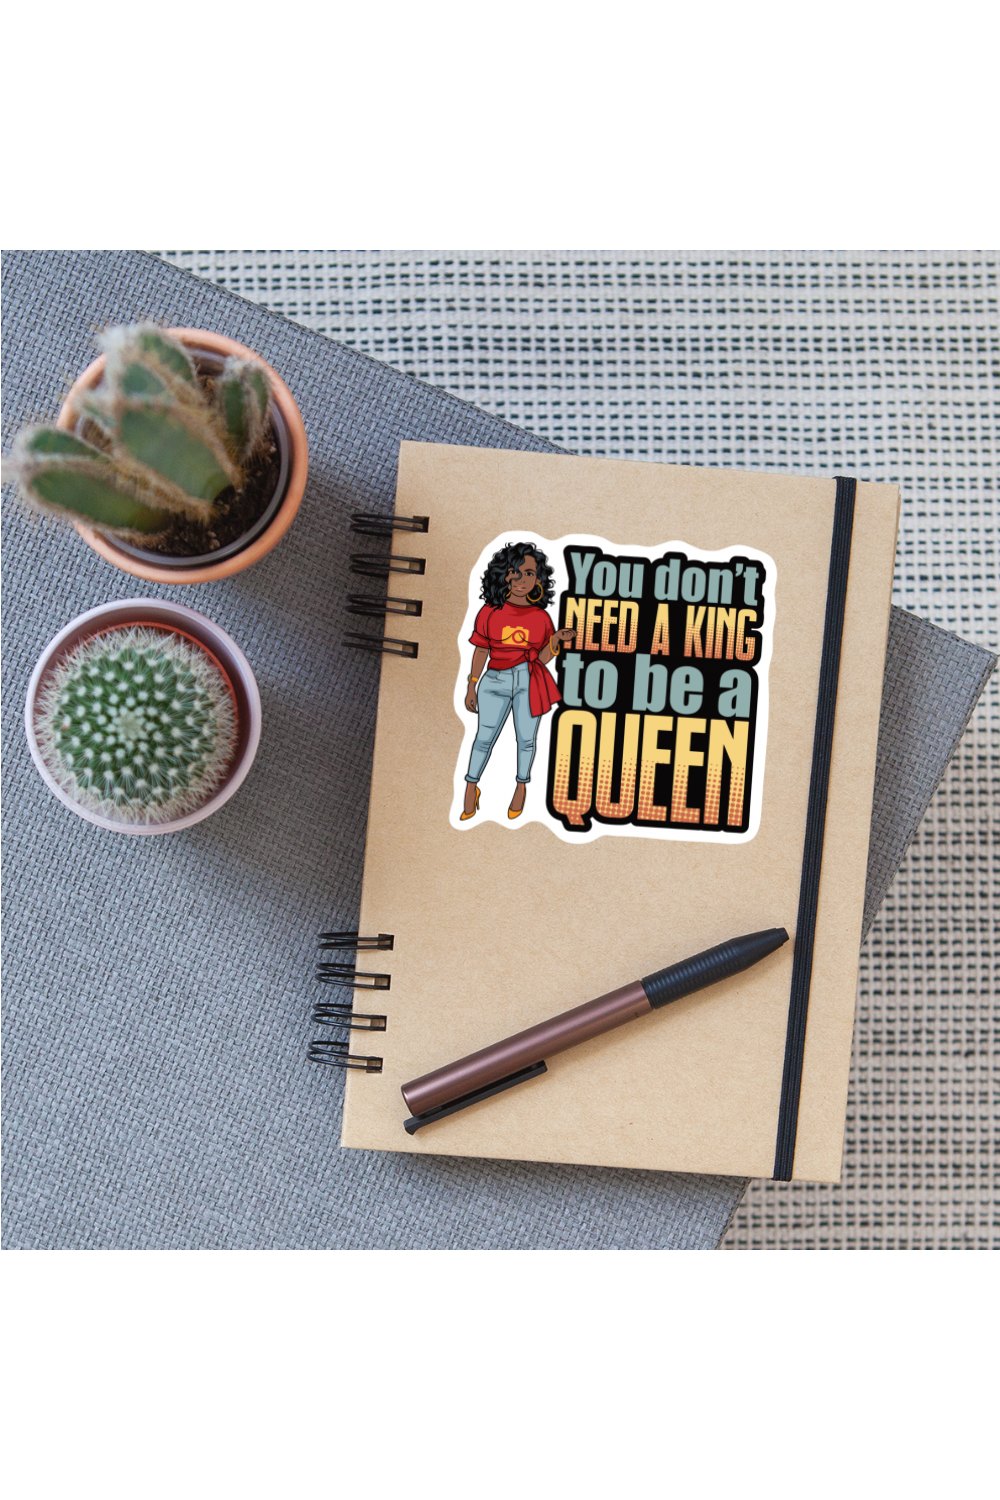 African American Women You don't Need a King to be a Queen Vinyl Sticker - white matte - NicholesGifts.online